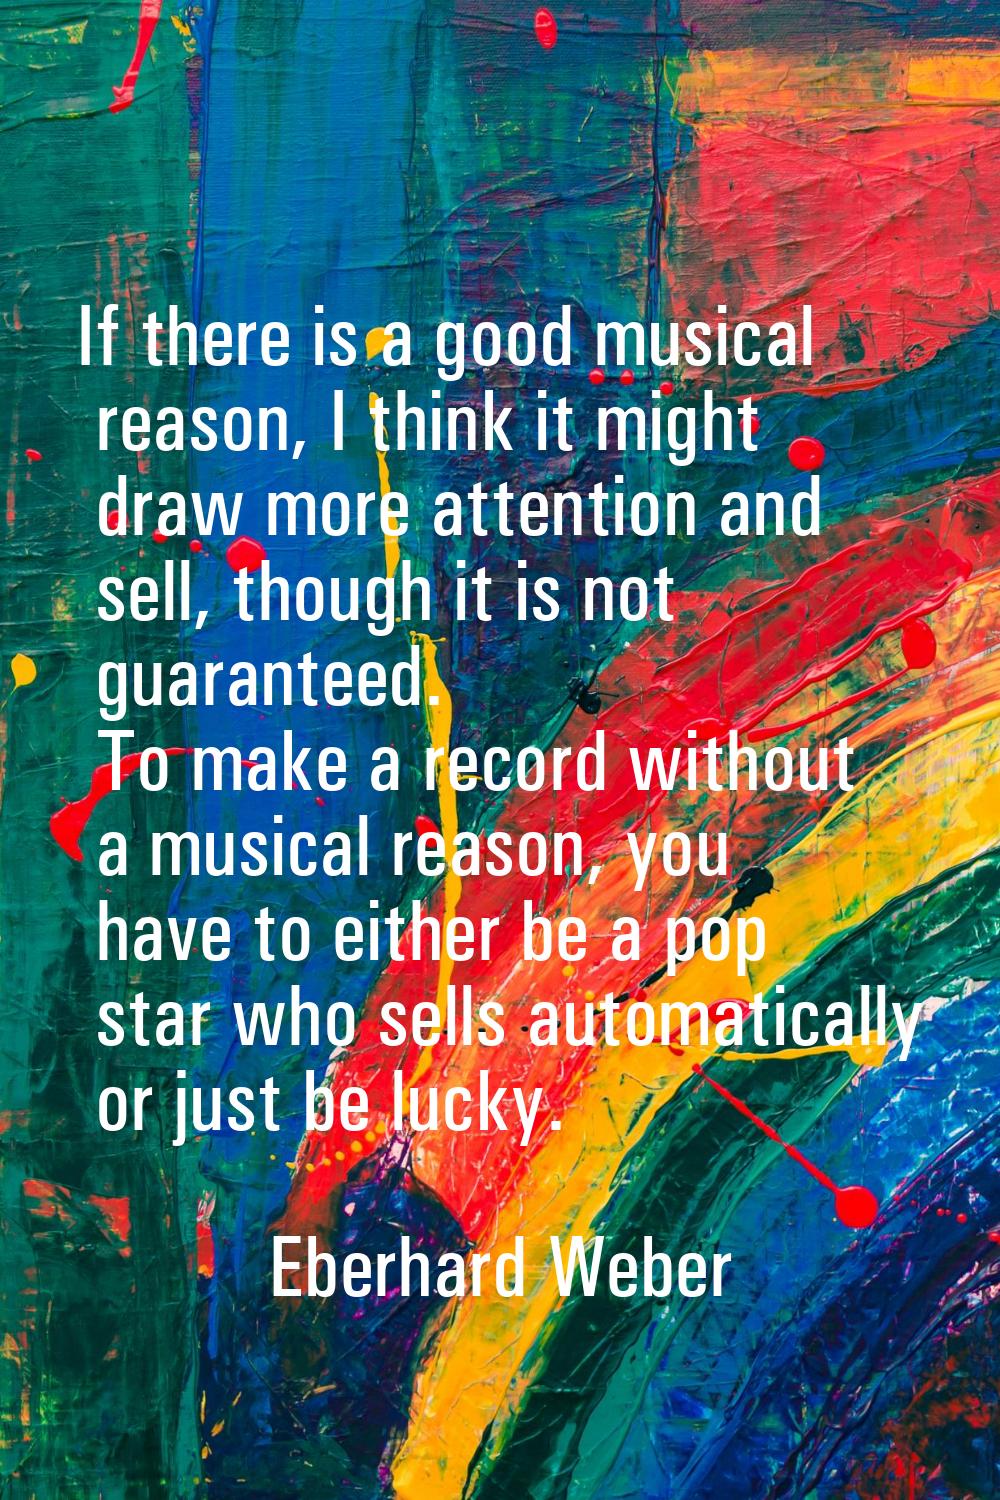 If there is a good musical reason, I think it might draw more attention and sell, though it is not 